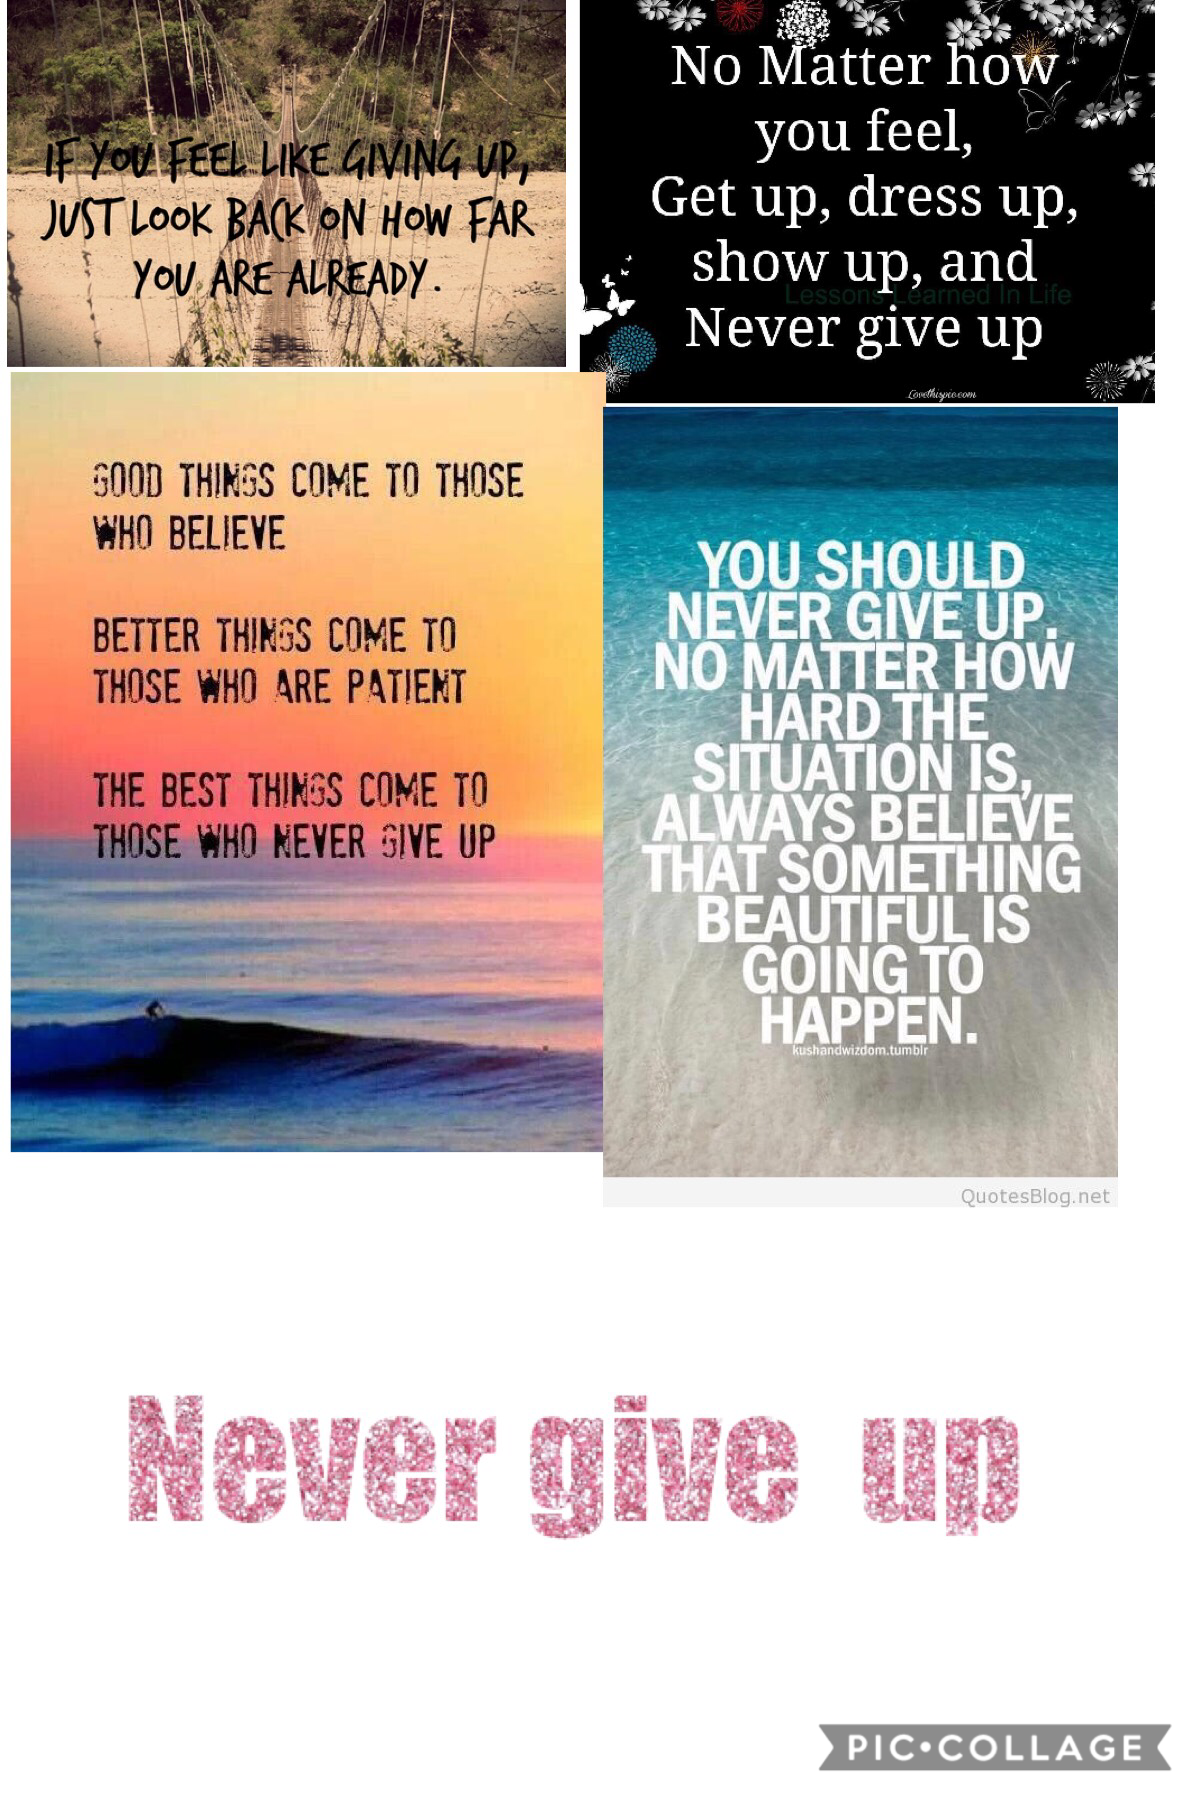 Never give up that’s what some one told me